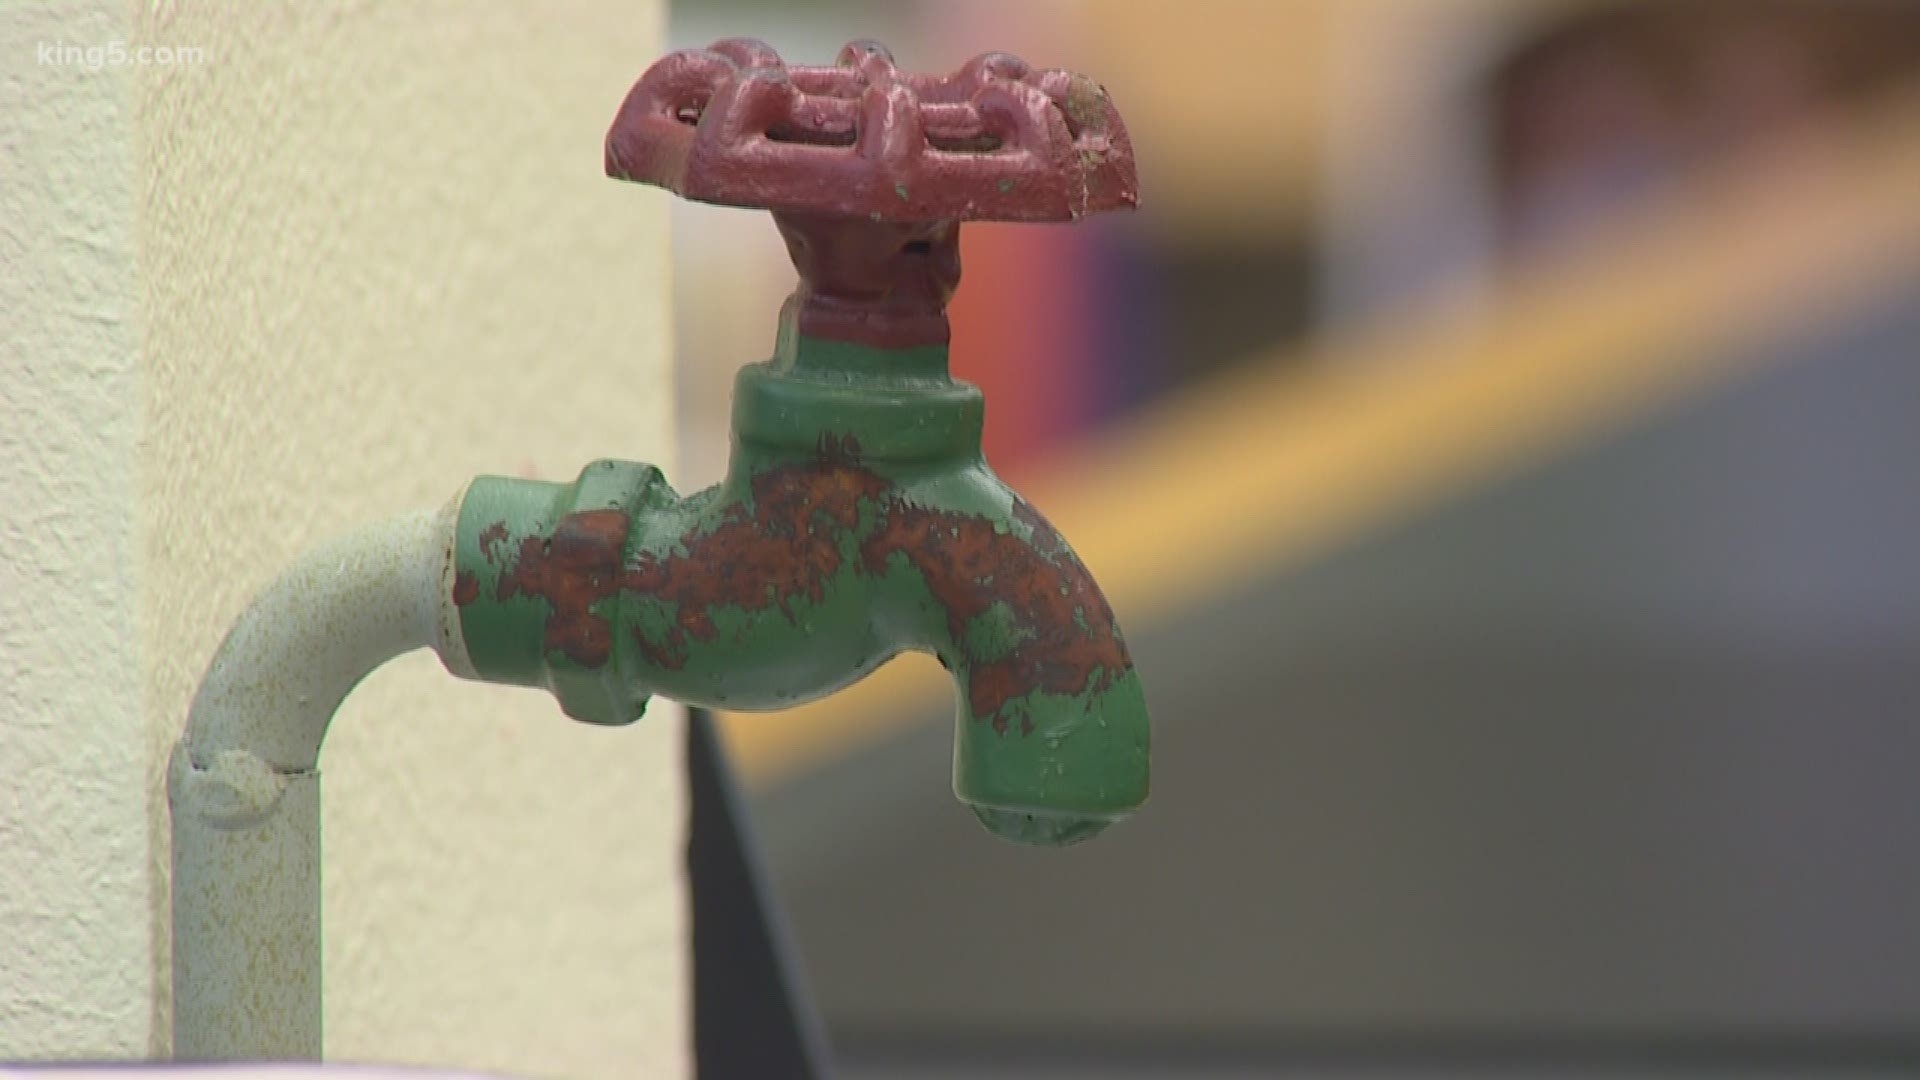 The city of Lacey is dealing with a data breach after hackers obtained credit card information from residents who pay their water bills online.